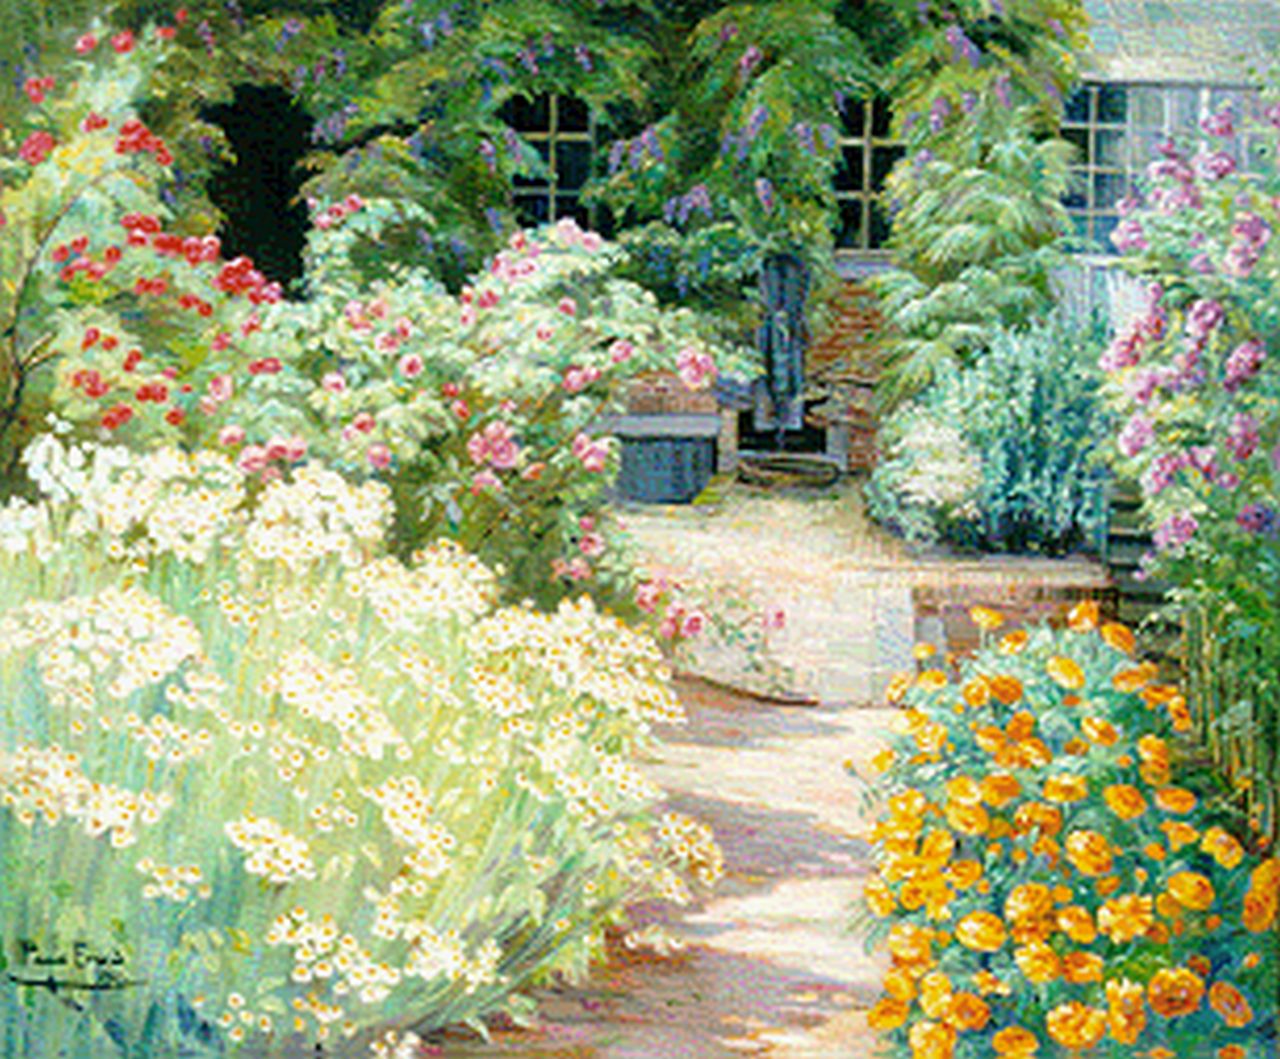 Evrard P.  | Paula Evrard, A flowering garden, oil on canvas 100.0 x 119.5 cm, signed l.l. and dated 1927